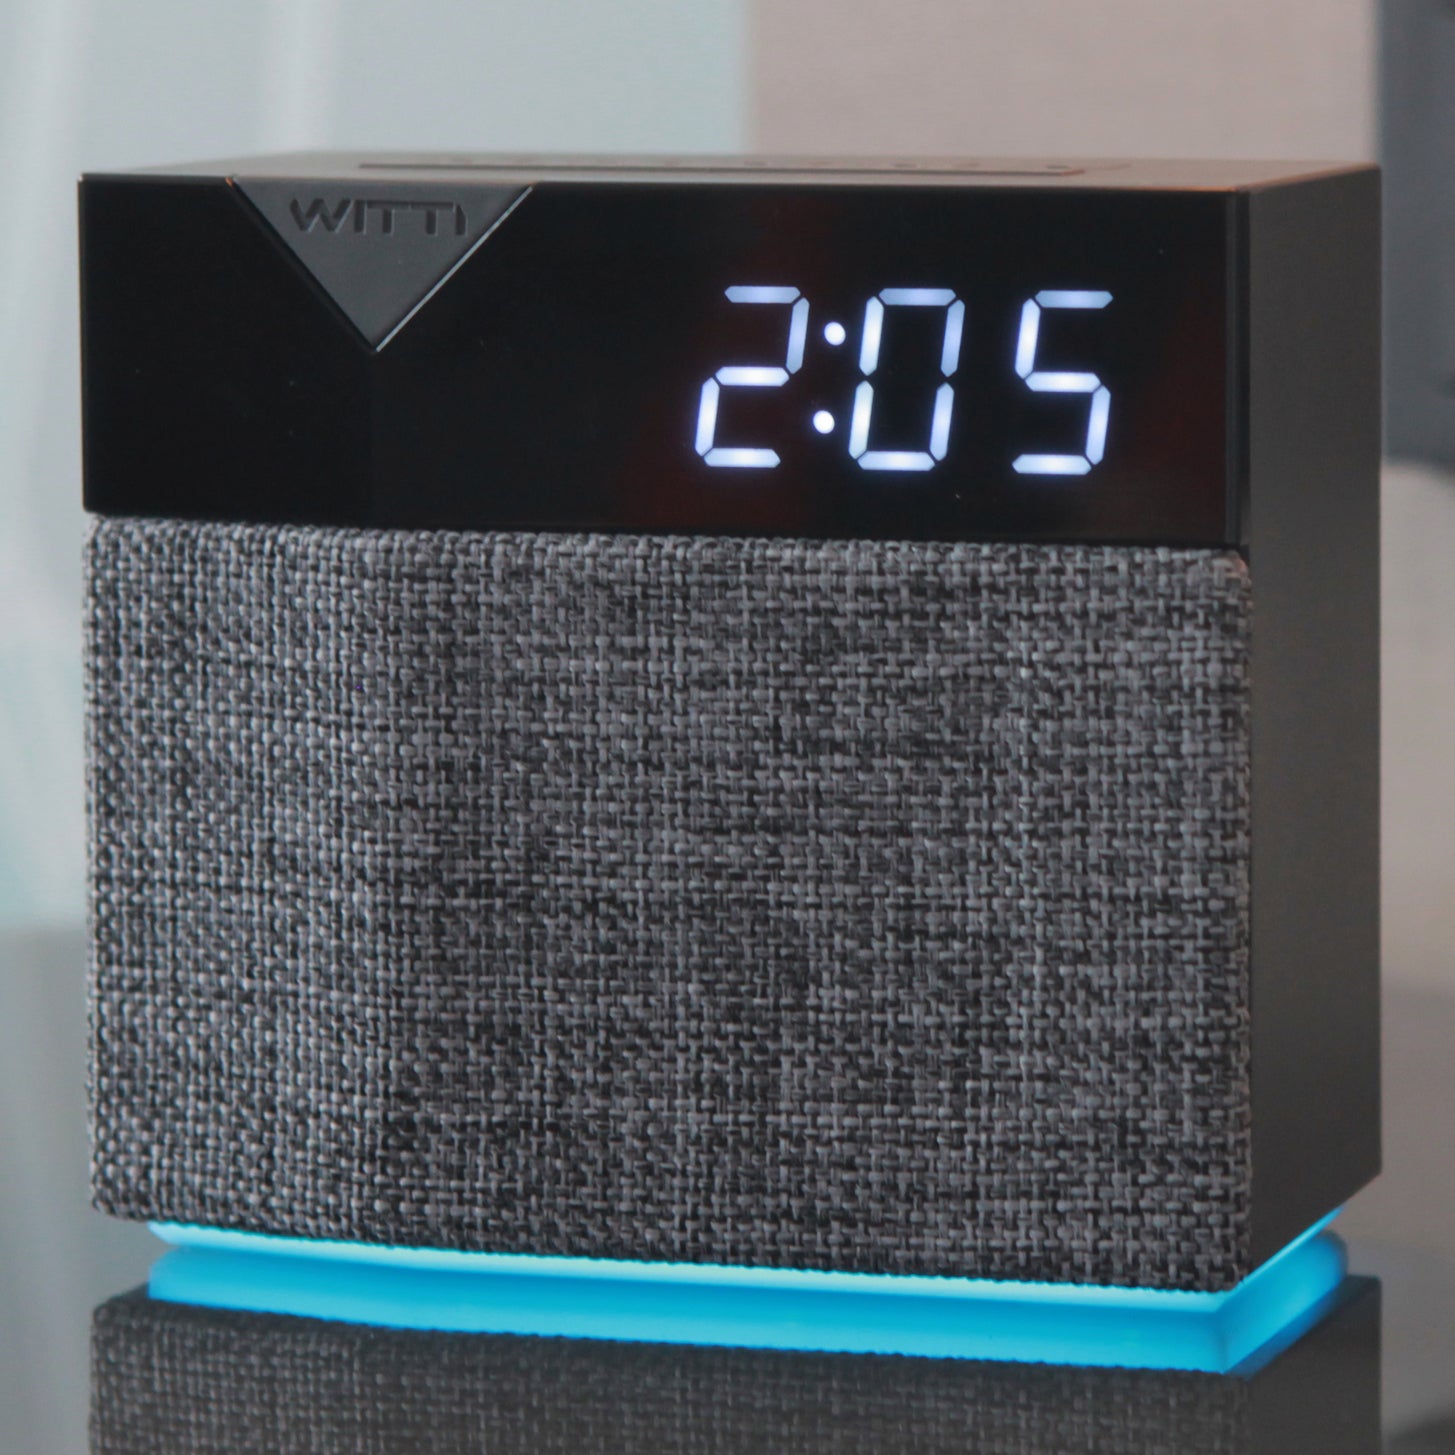 BEDDI Style - Intelligent Alarm Clock with Changeable Faceplate